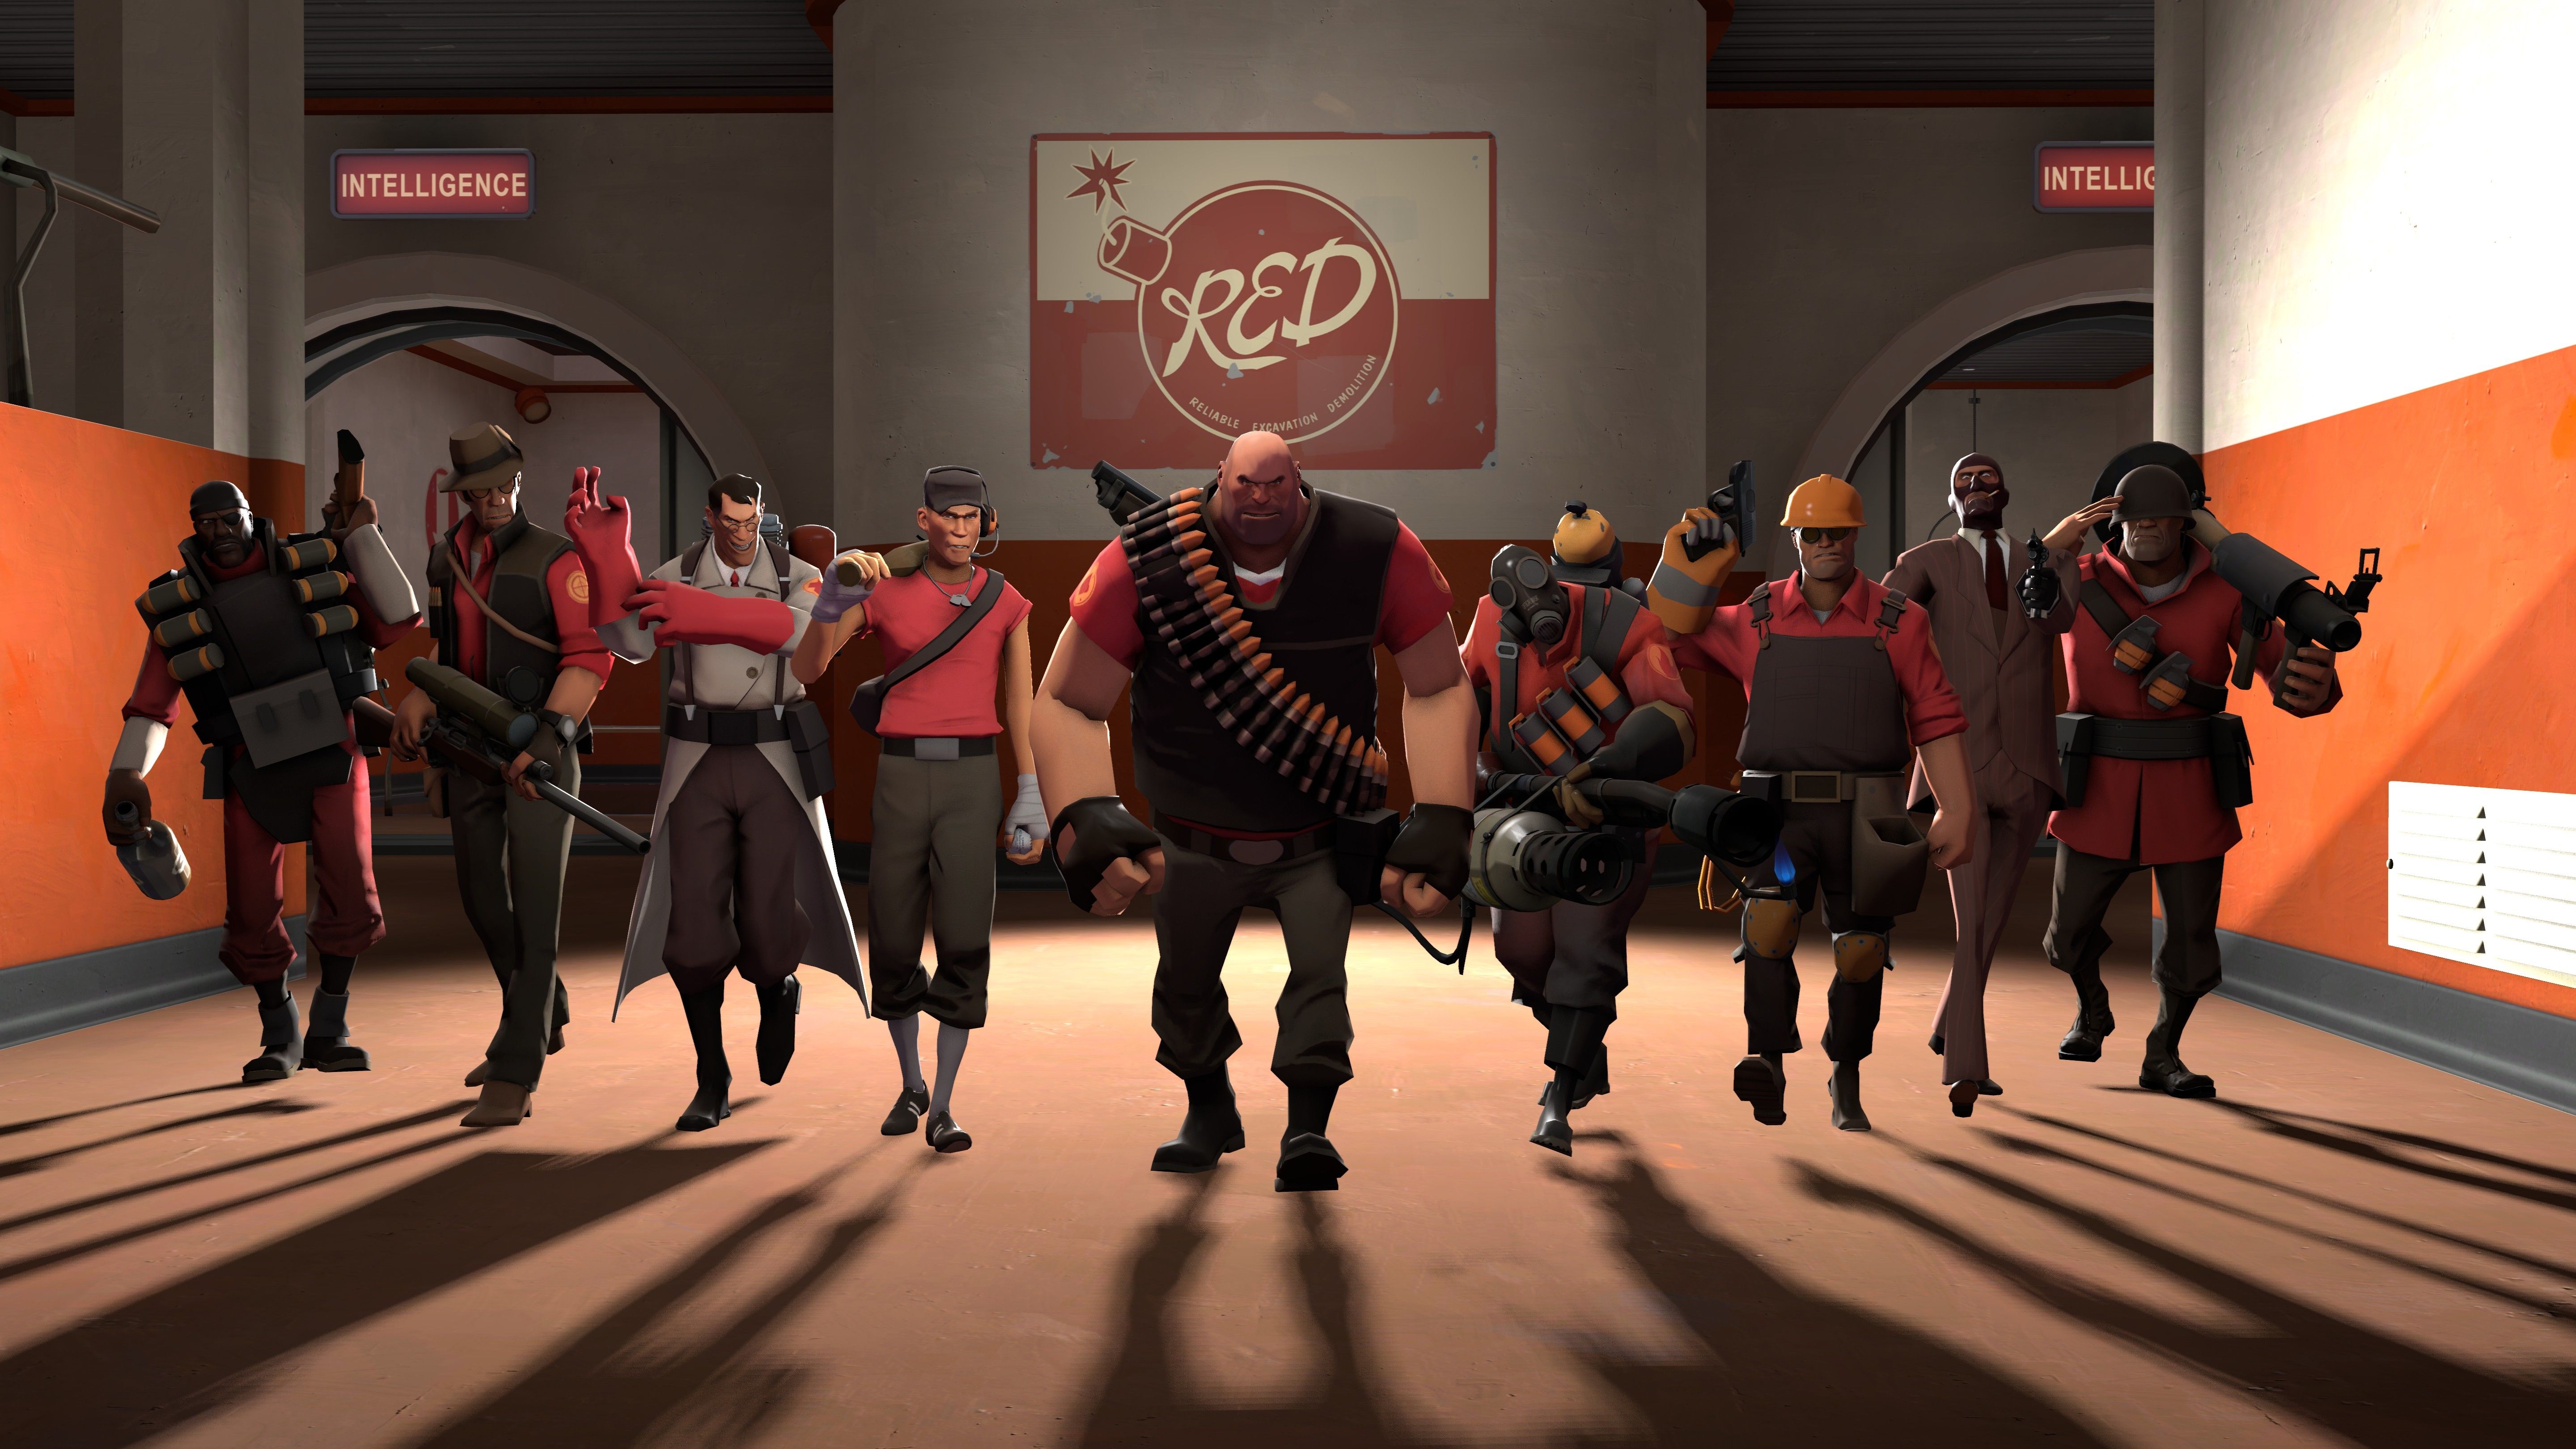 Wallpapers Team Fortress 2, TF2, FPS, mod, modification, screenshot